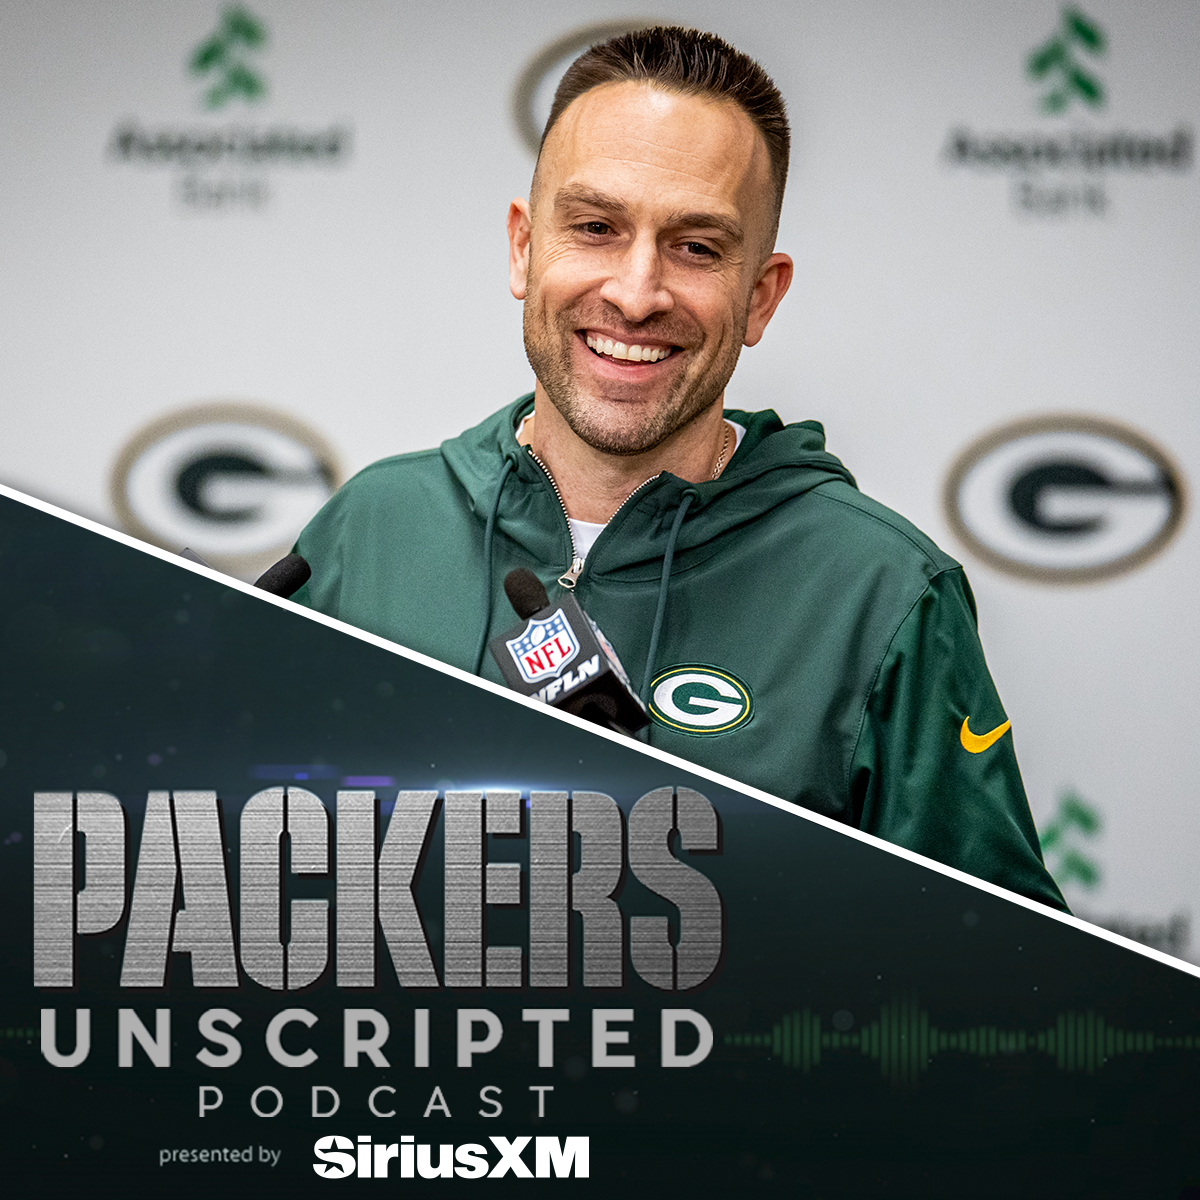 #765 Packers Unscripted: Back from a busy offseason